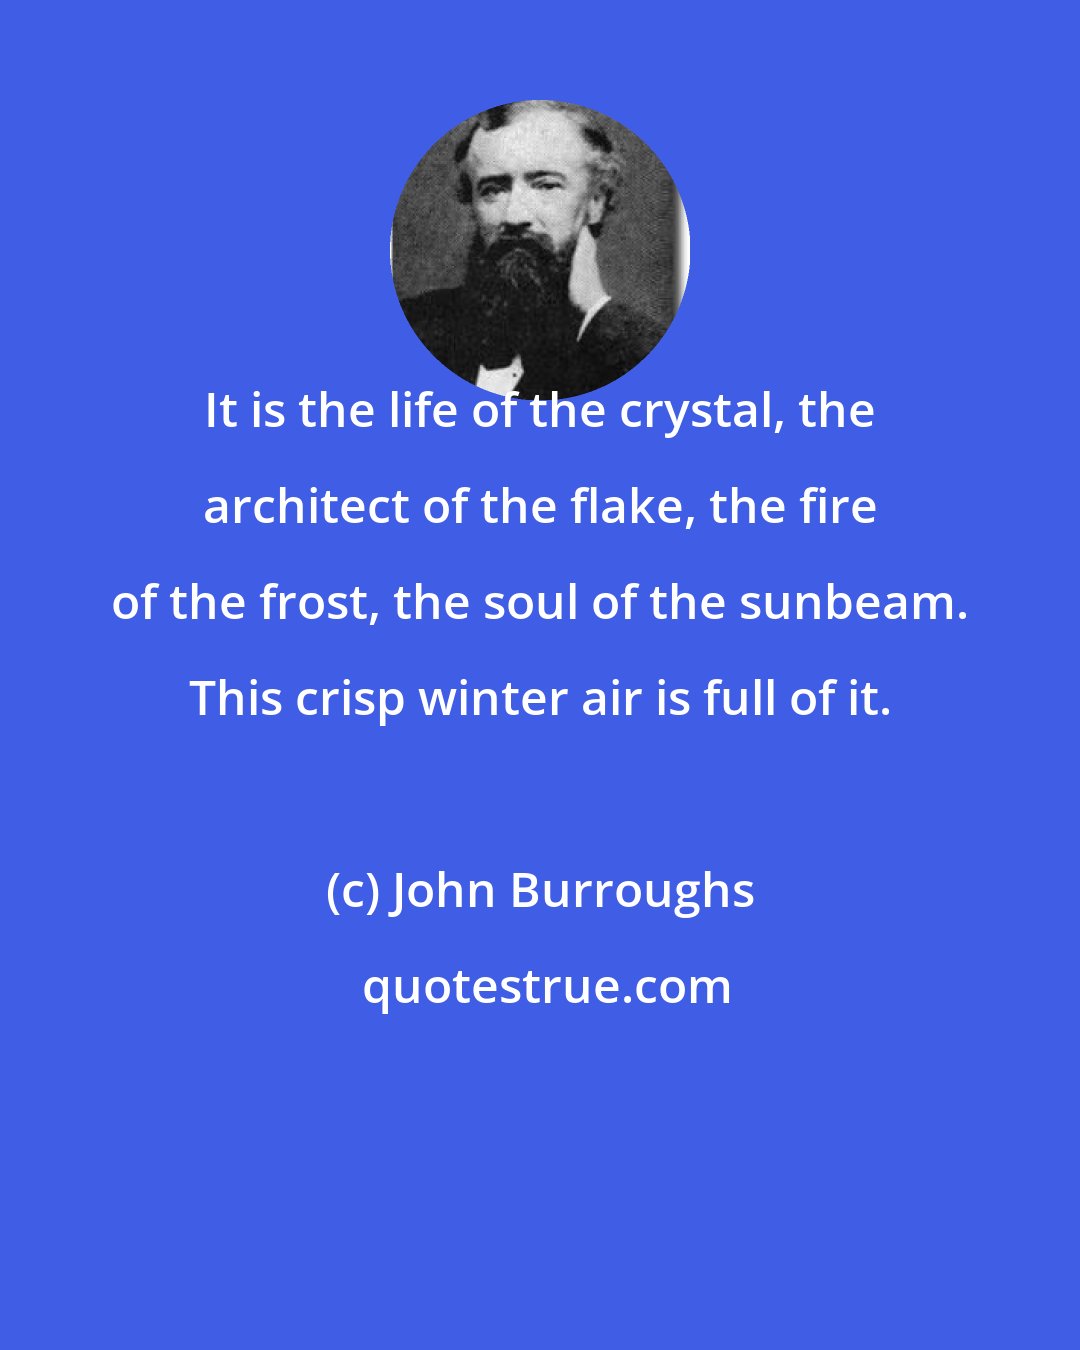 John Burroughs: It is the life of the crystal, the architect of the flake, the fire of the frost, the soul of the sunbeam. This crisp winter air is full of it.